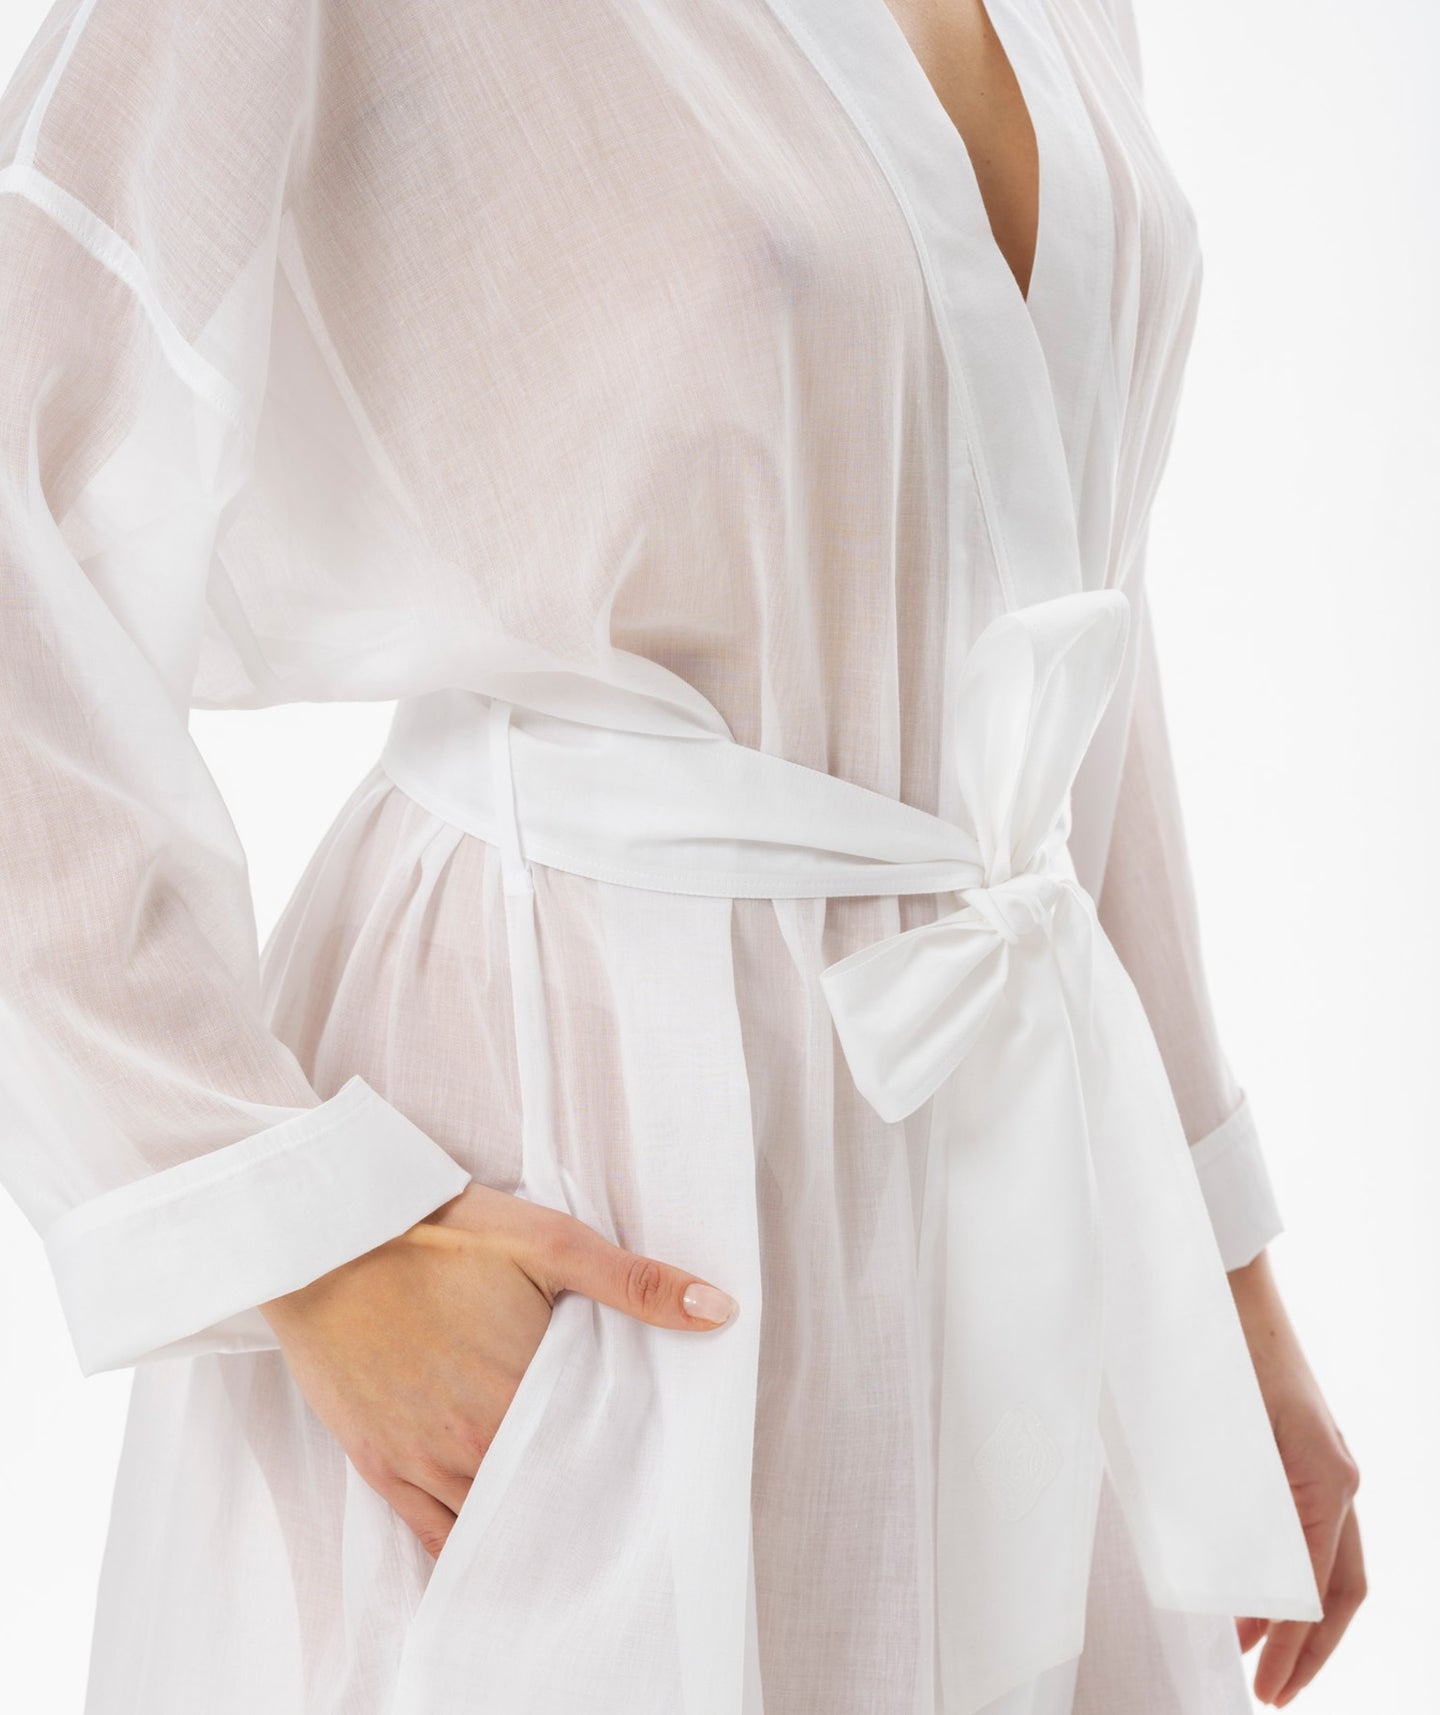 Full length (130cm) Kimono Style robe.   Made in Germany from the finest mousseline, this full length, diaphanous dressing gown is a 100% pure cotton. It has the classic Kimono style collarless style. The generous sleeves have a dropped shoulder, for that casual look. It is belted and with a side pocket. This robe offers the wearer perfect cover without heaviness.